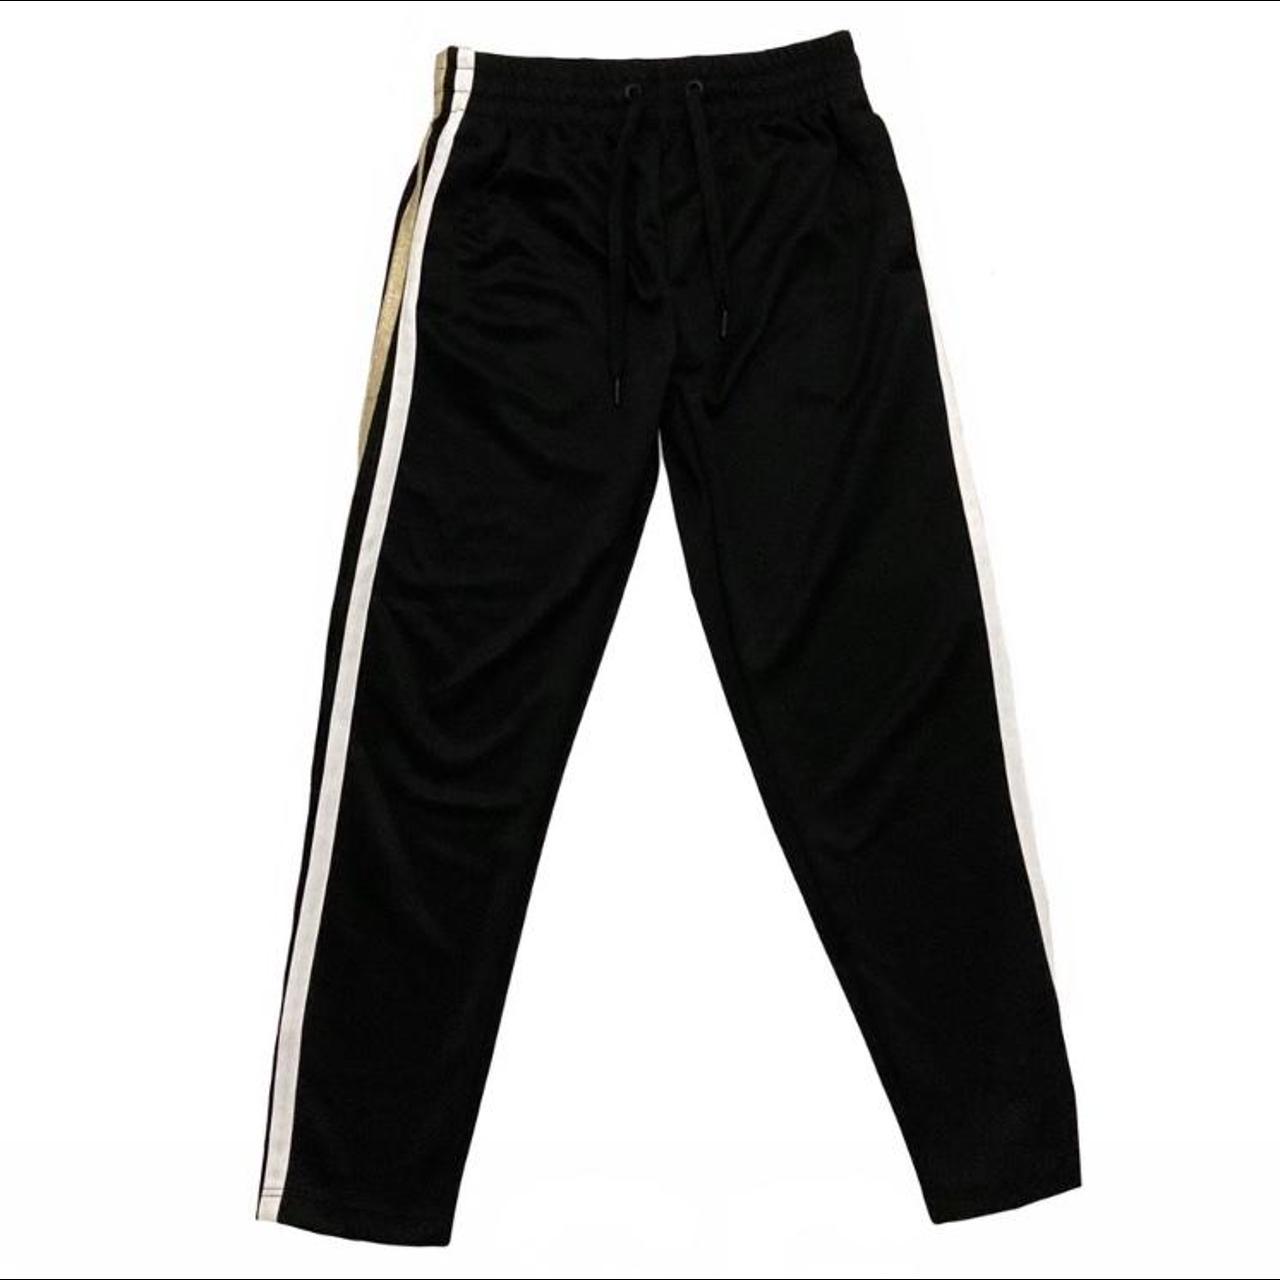 Champs Sports Men's Black and Gold Joggers-tracksuits | Depop